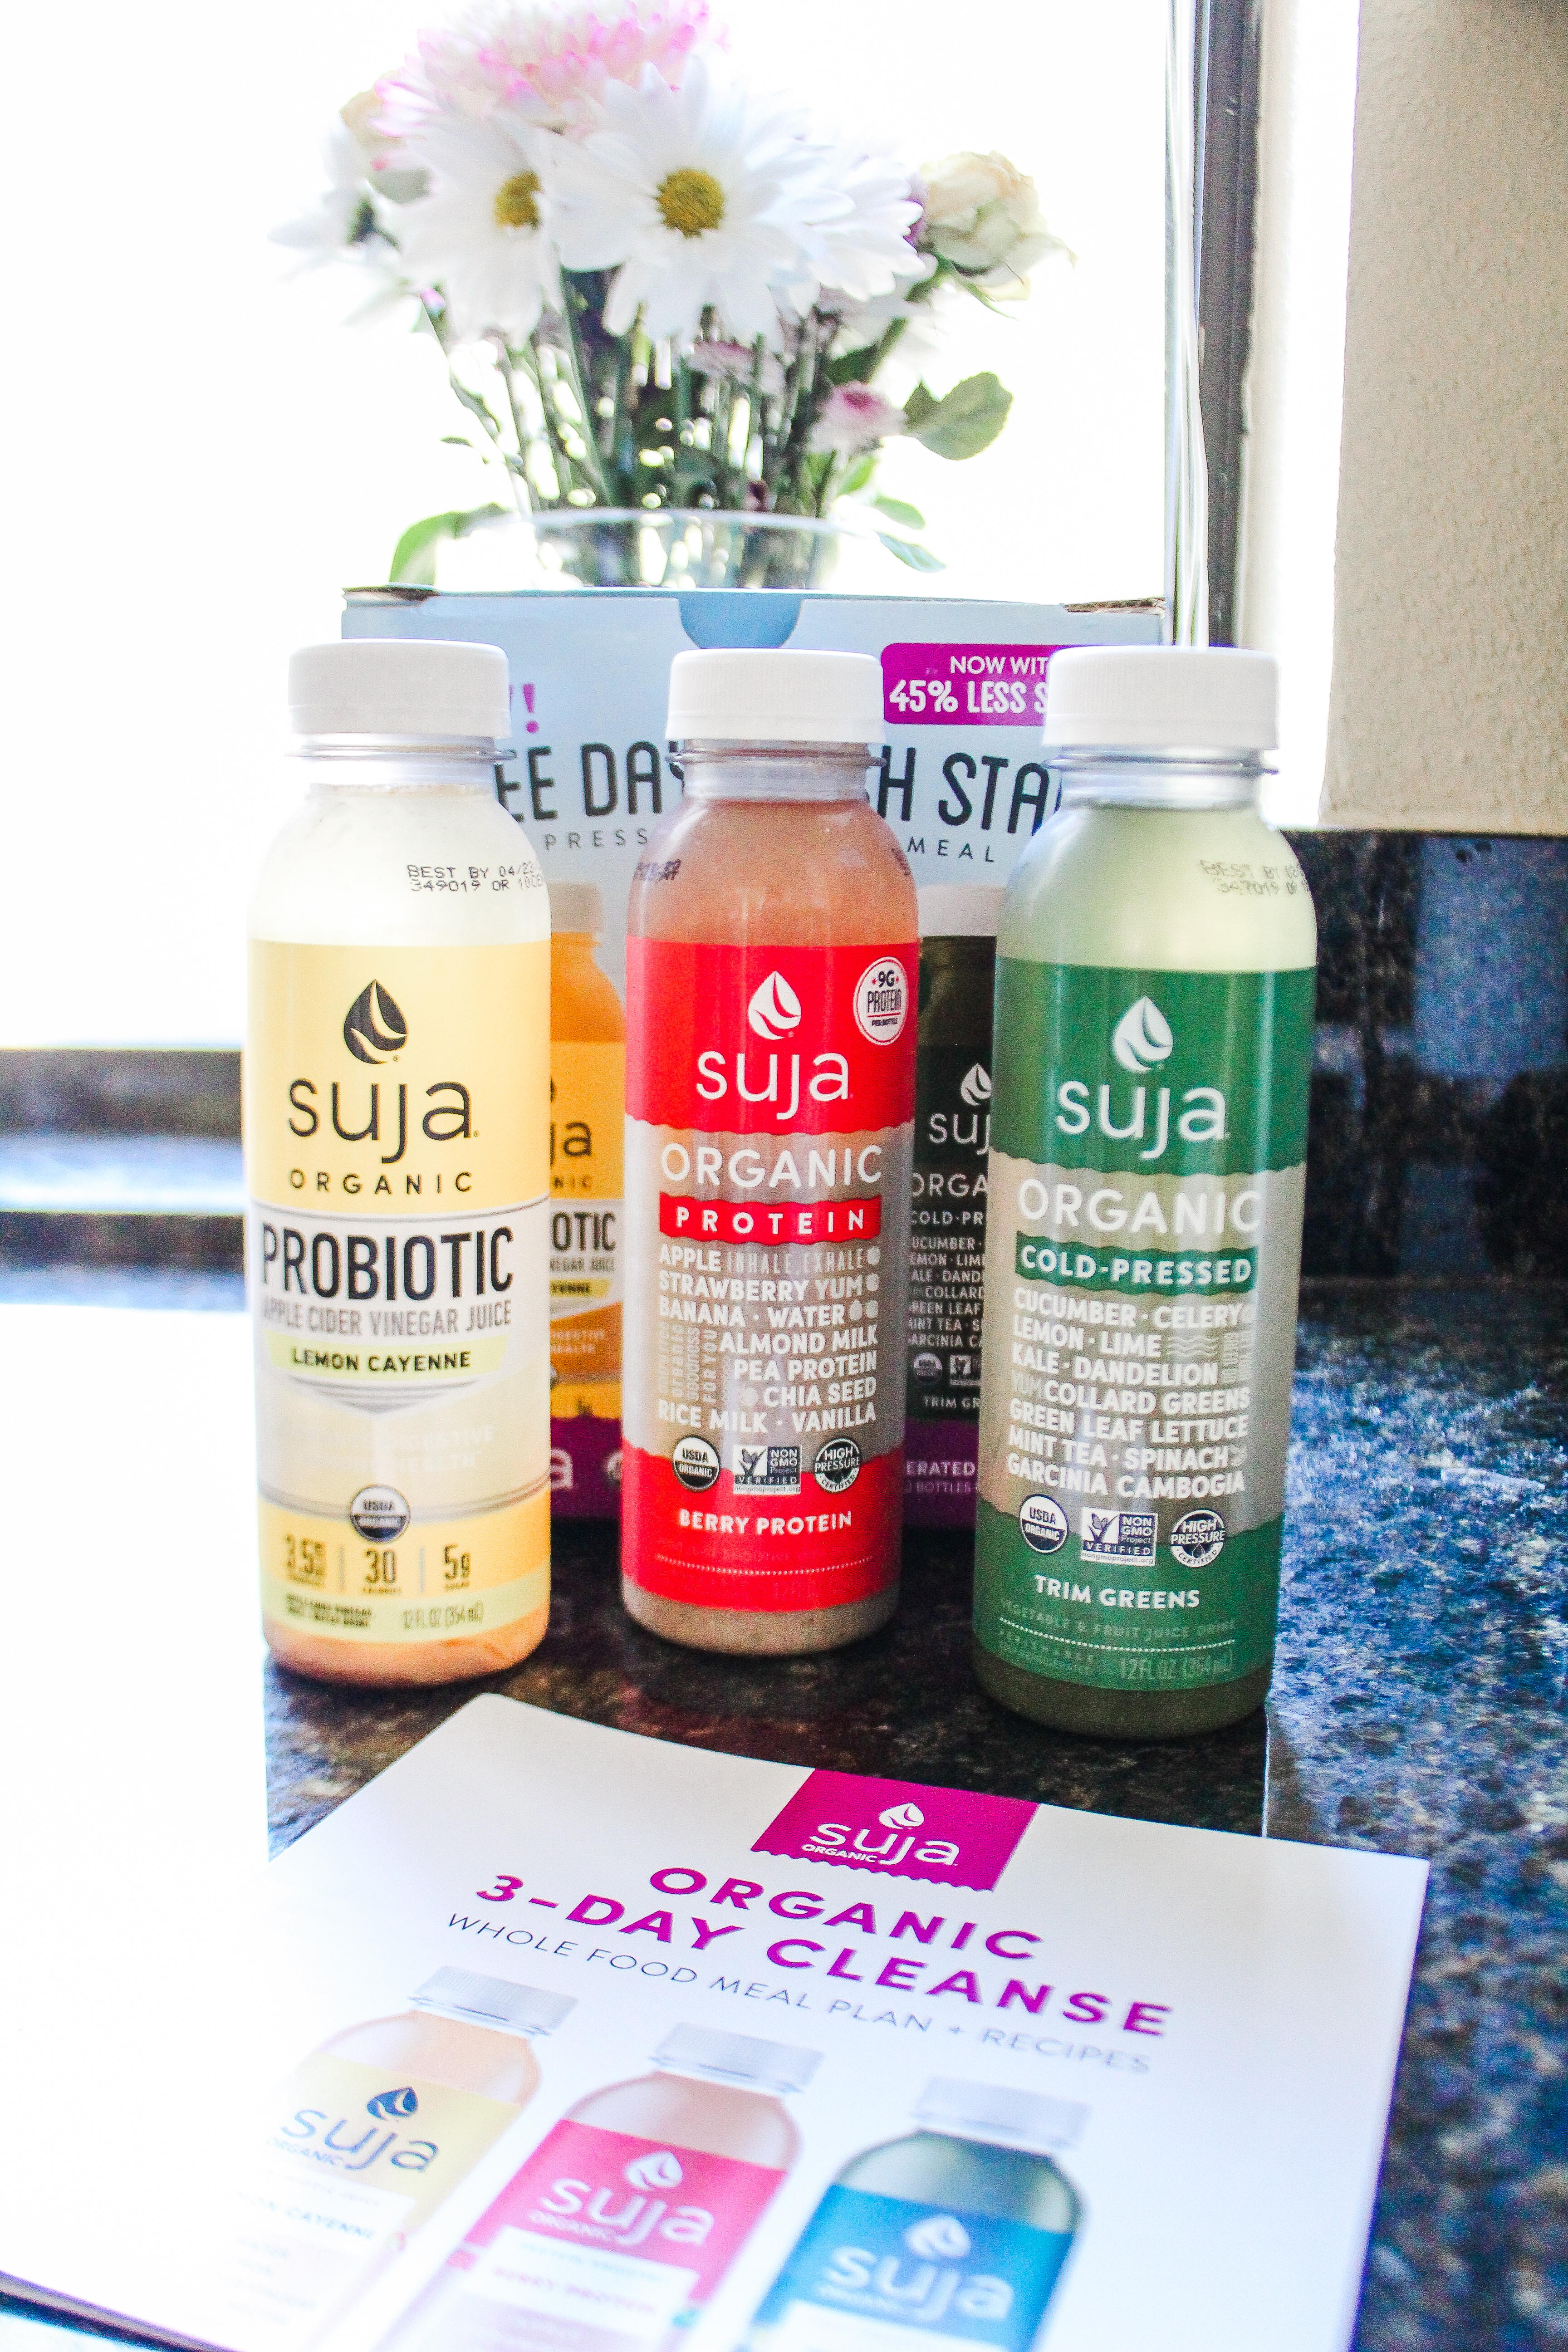 Suja 3 Day Juice Cleanse - www.spousesproutsme.com